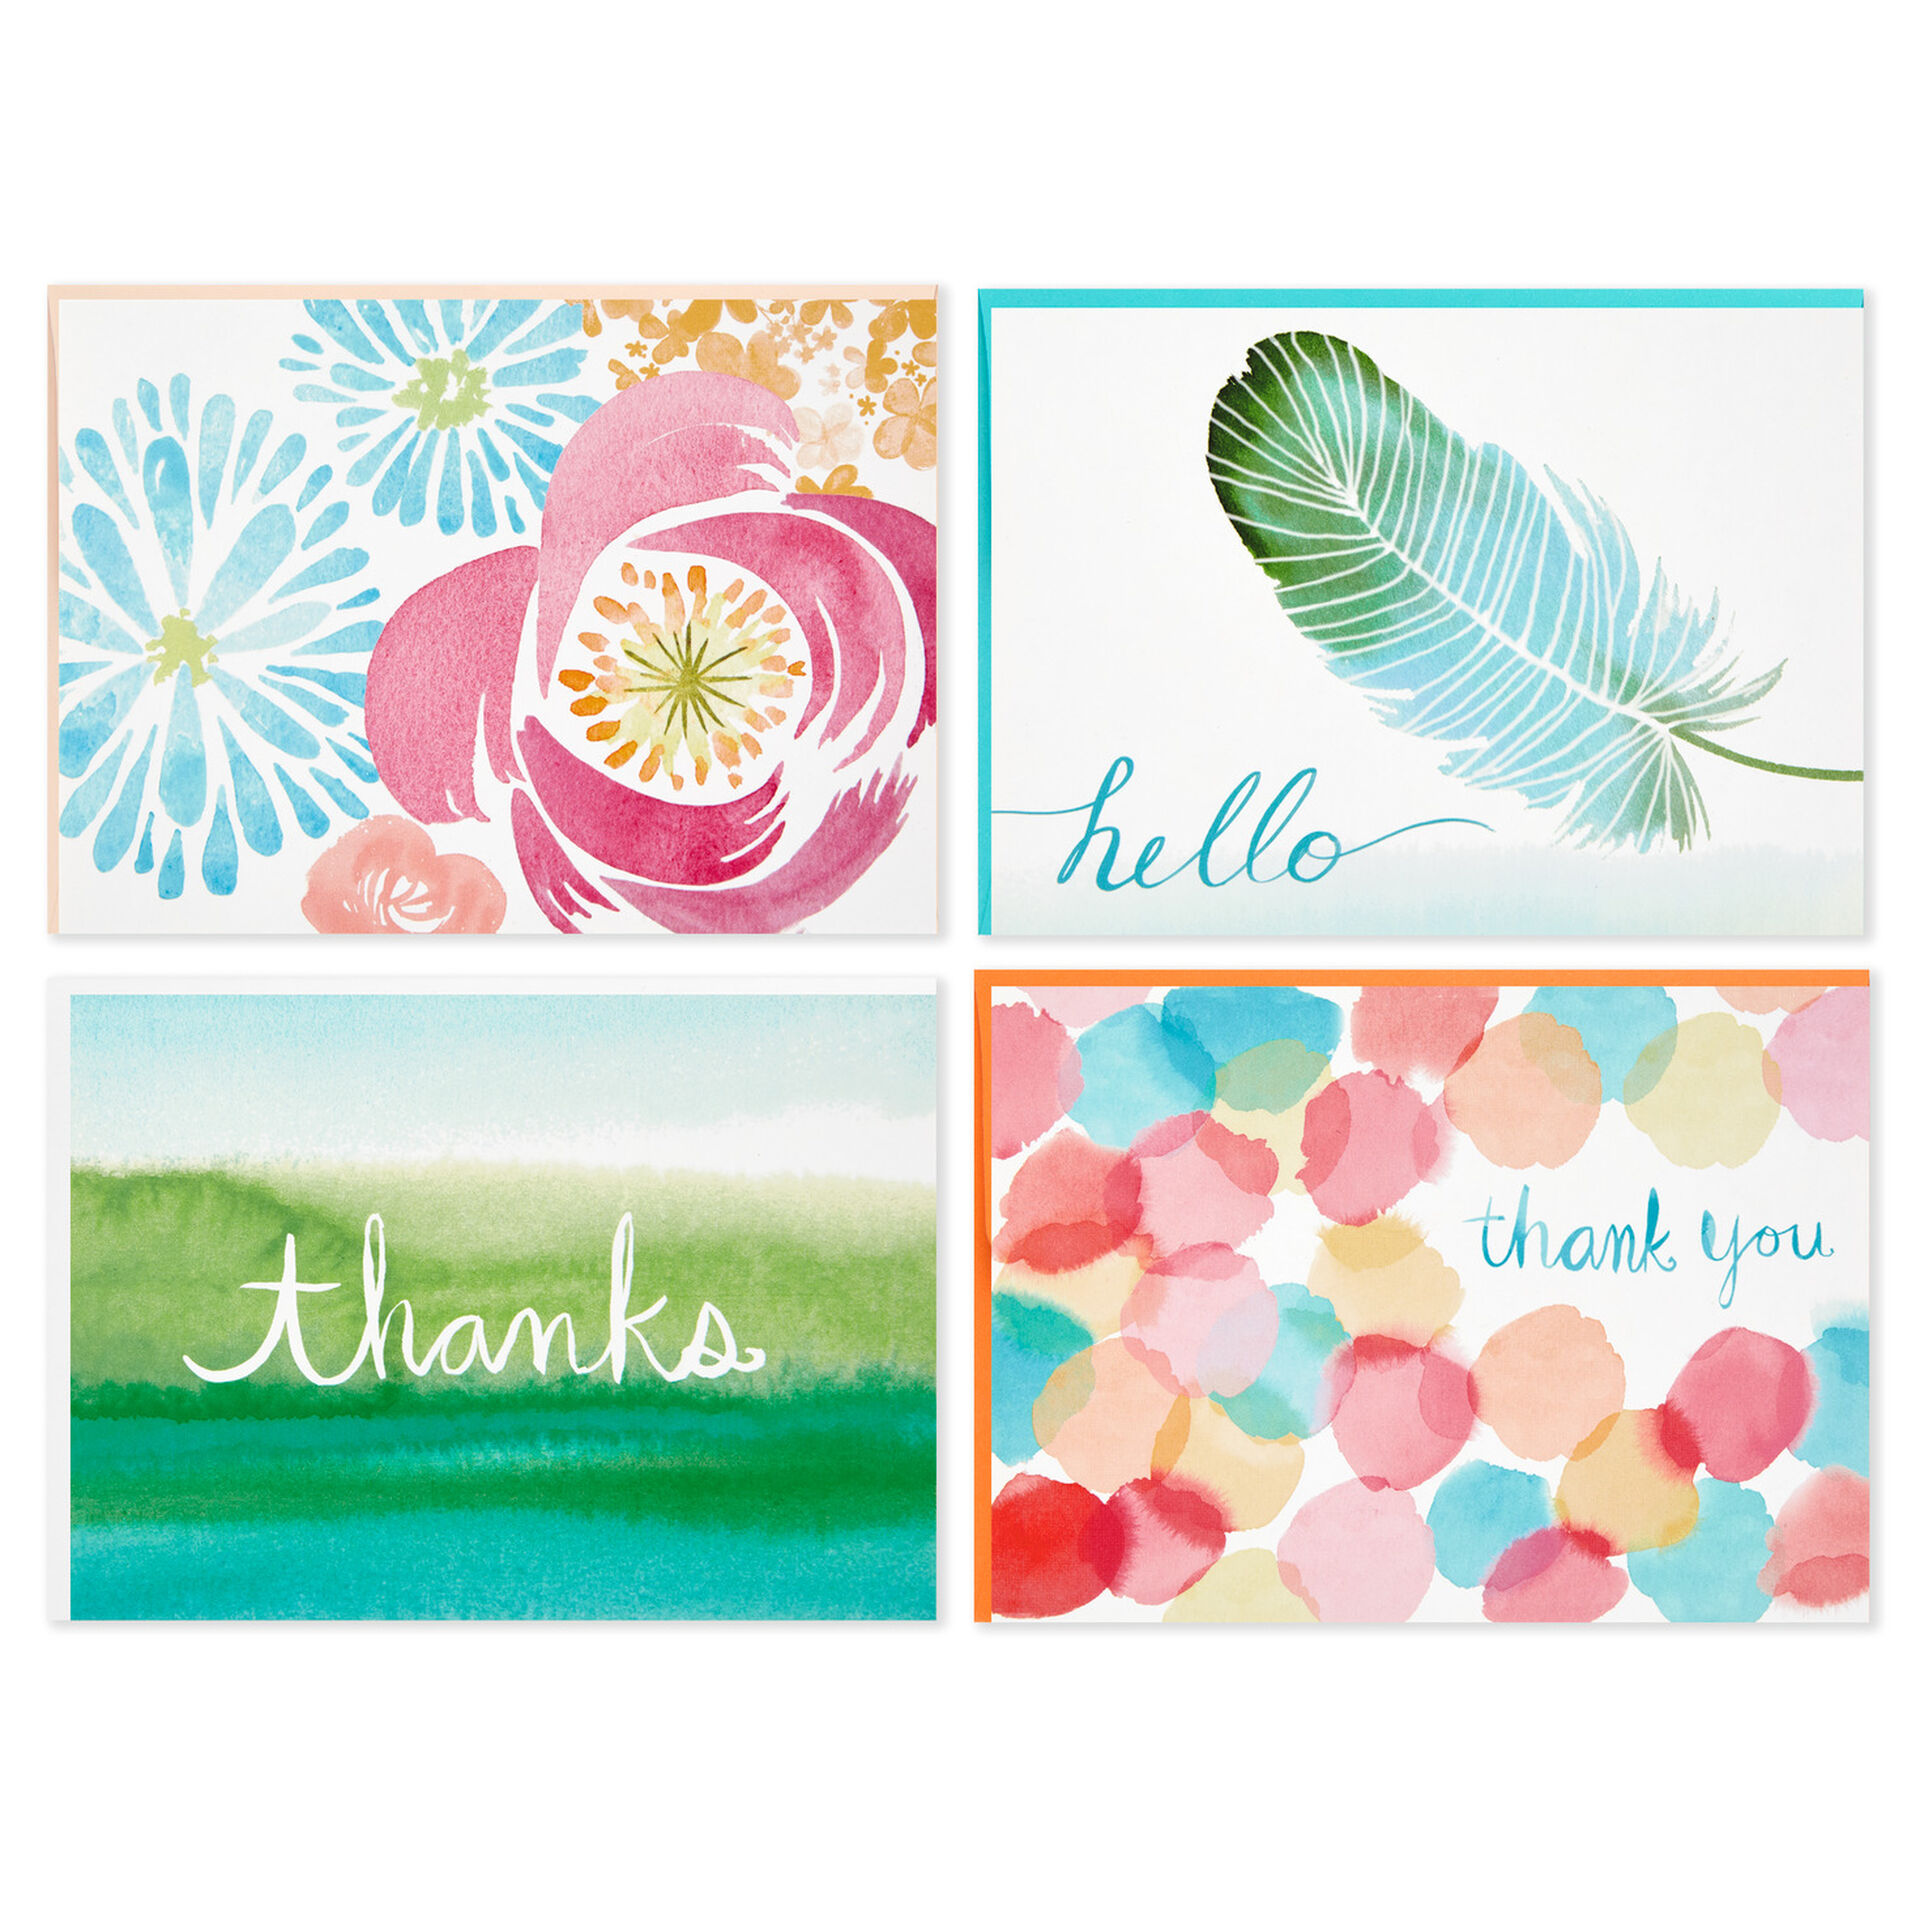 Watercolor-Blank-Note-Cards-Assortment-Pack_5WDN2068_02